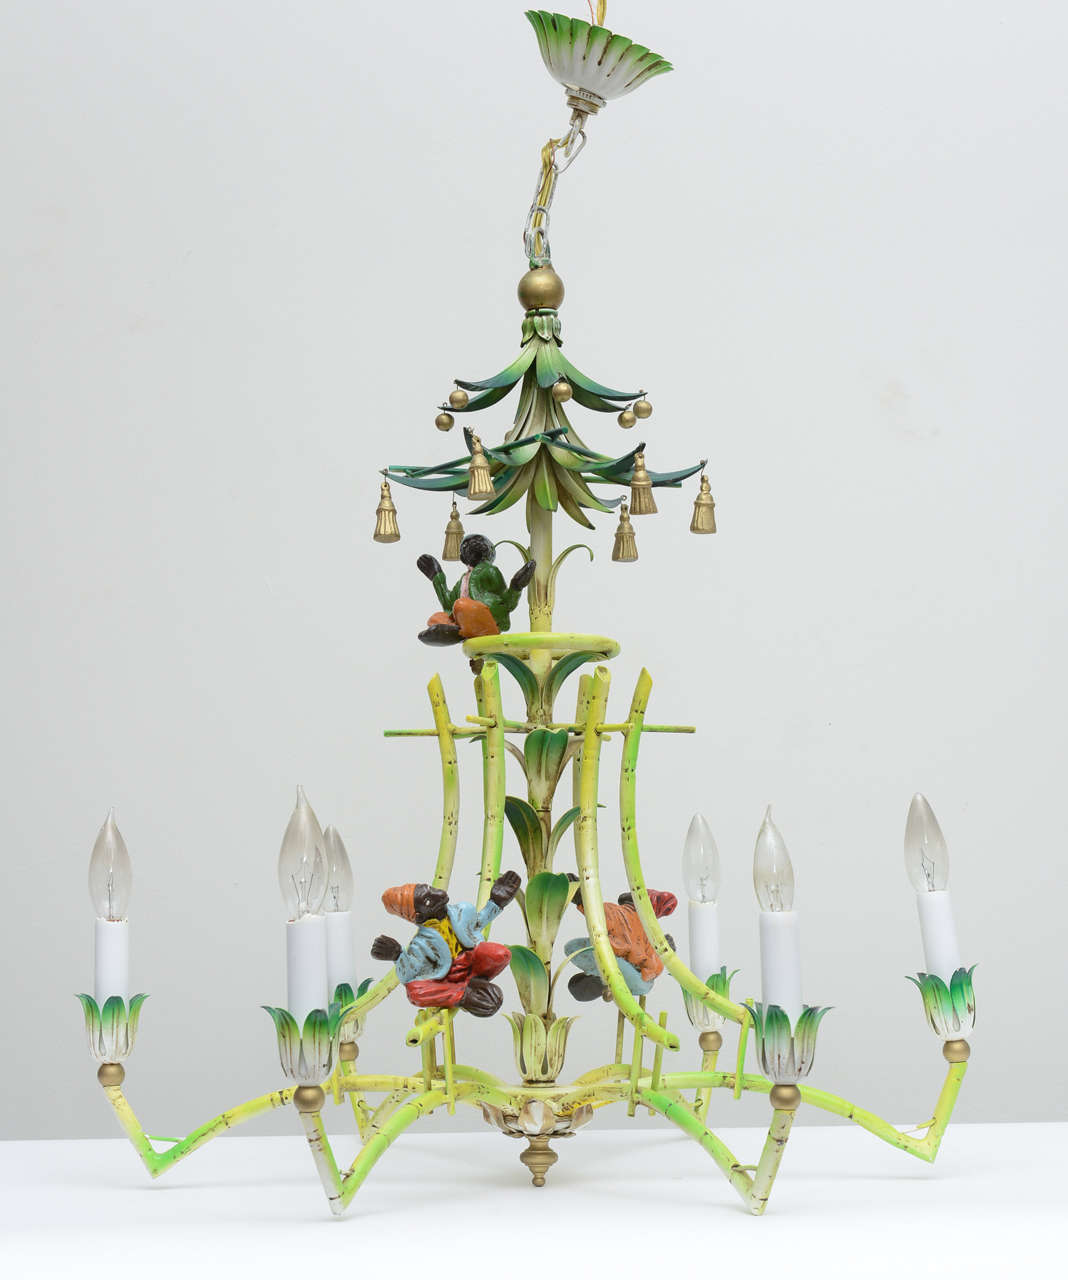 Palm Beach style faux bamboo metal chandelier with fanciful monkeys perched in various places.